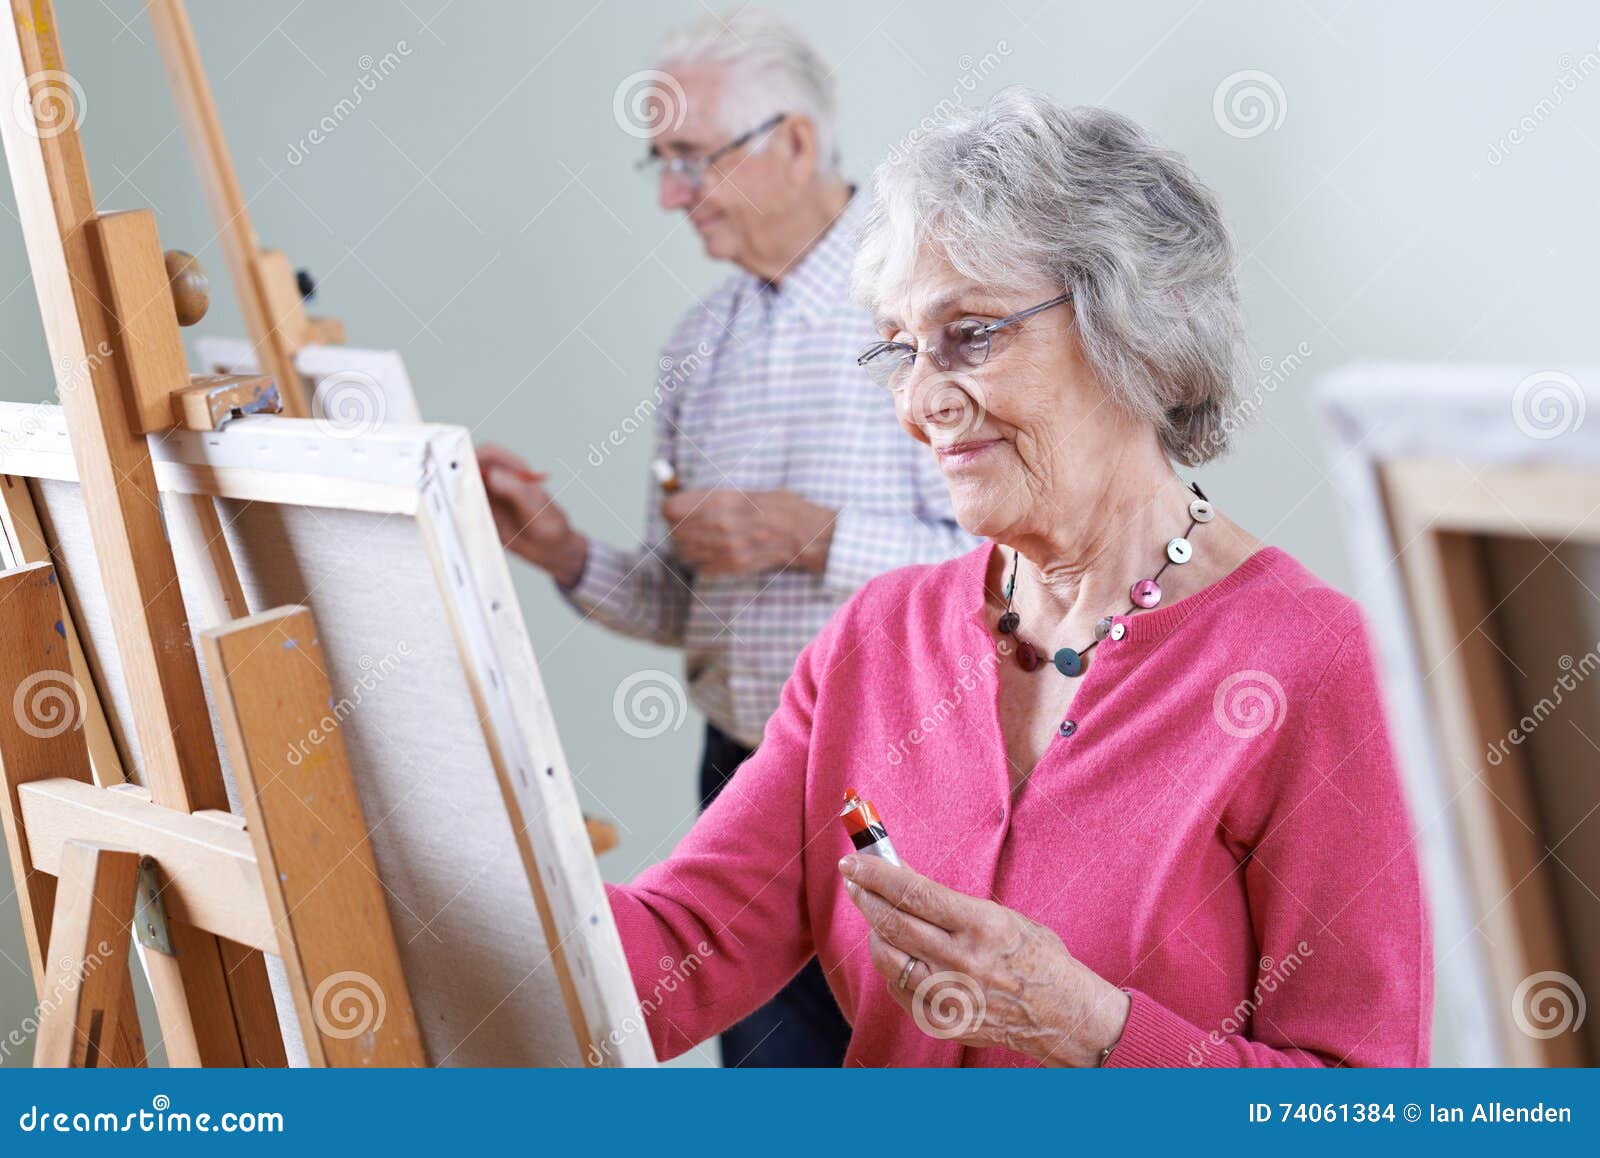 seniors attending painting class together